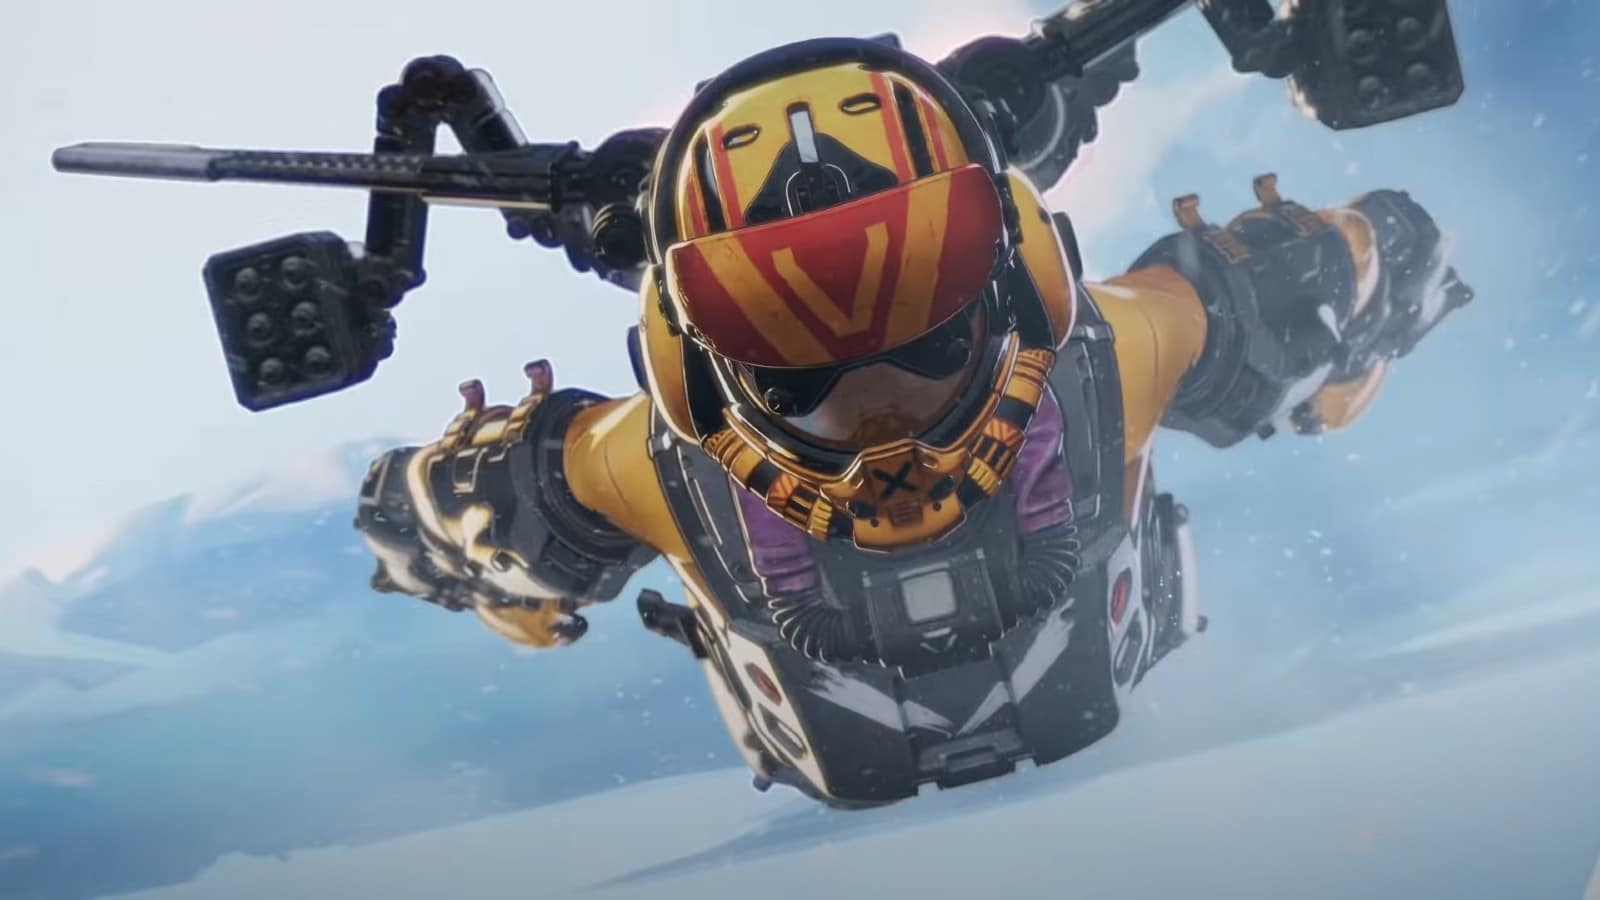 Valkyrie ult in Apex Legends